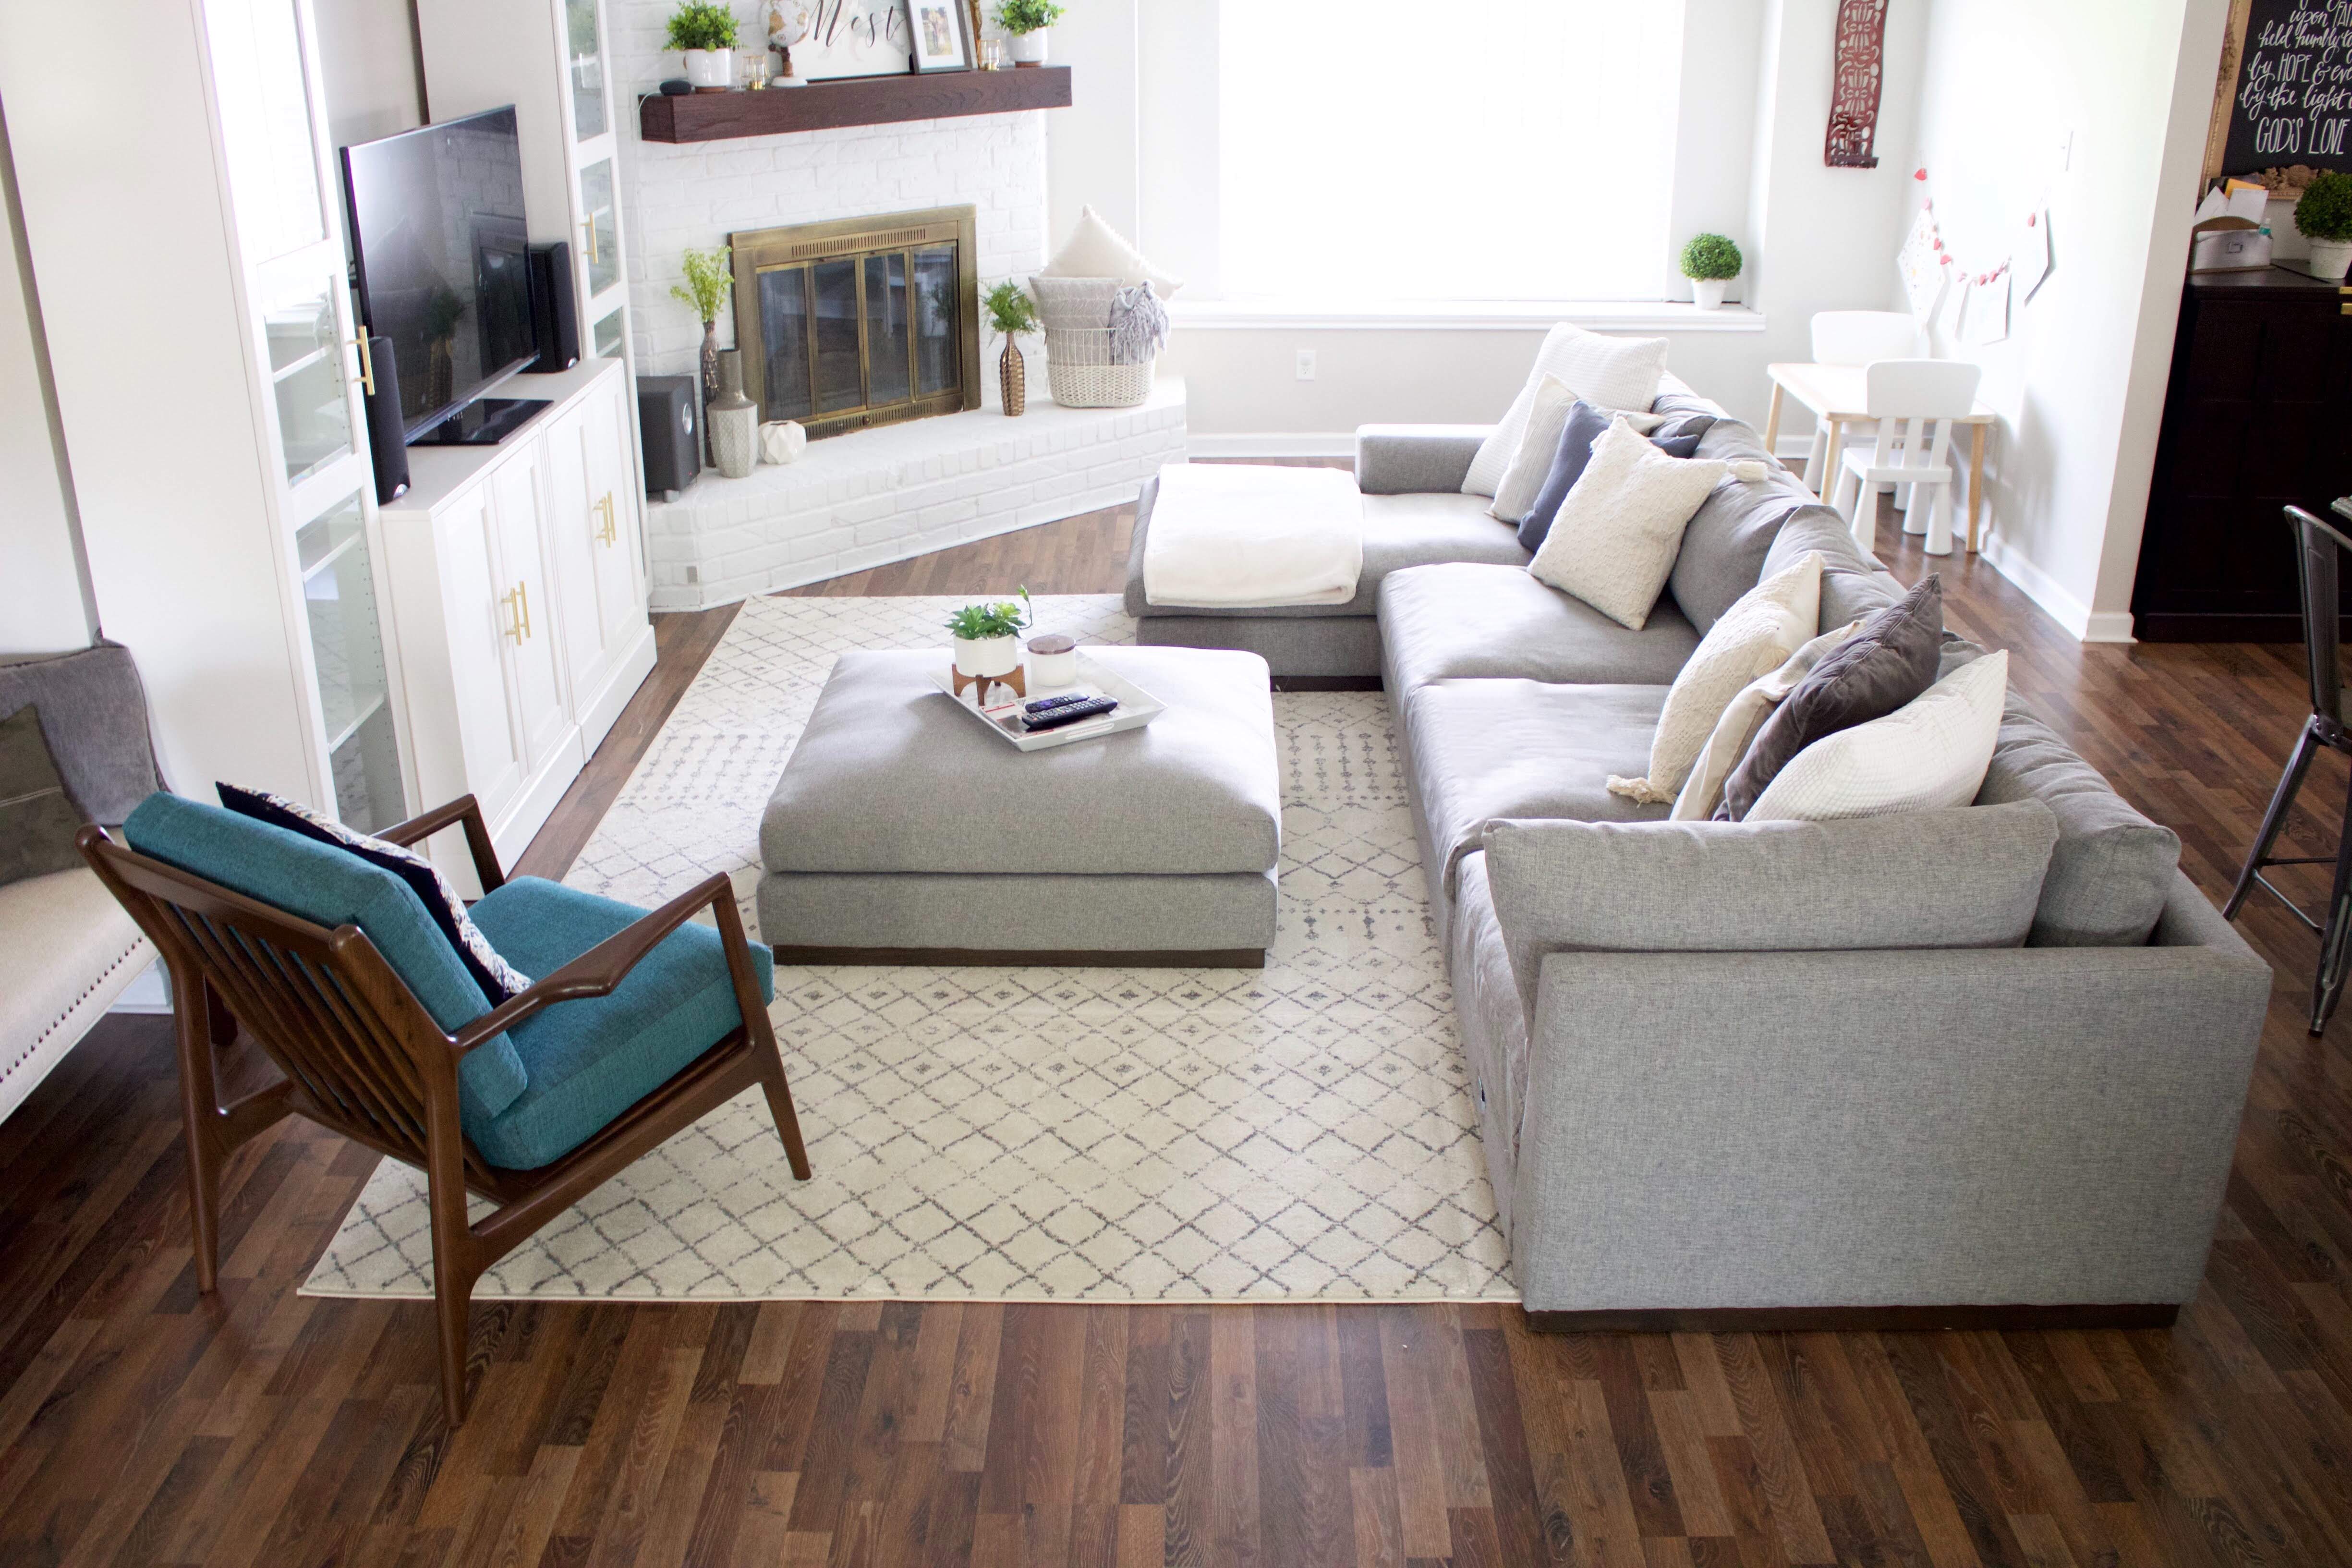 Ideas For A Small Living Room Makeover